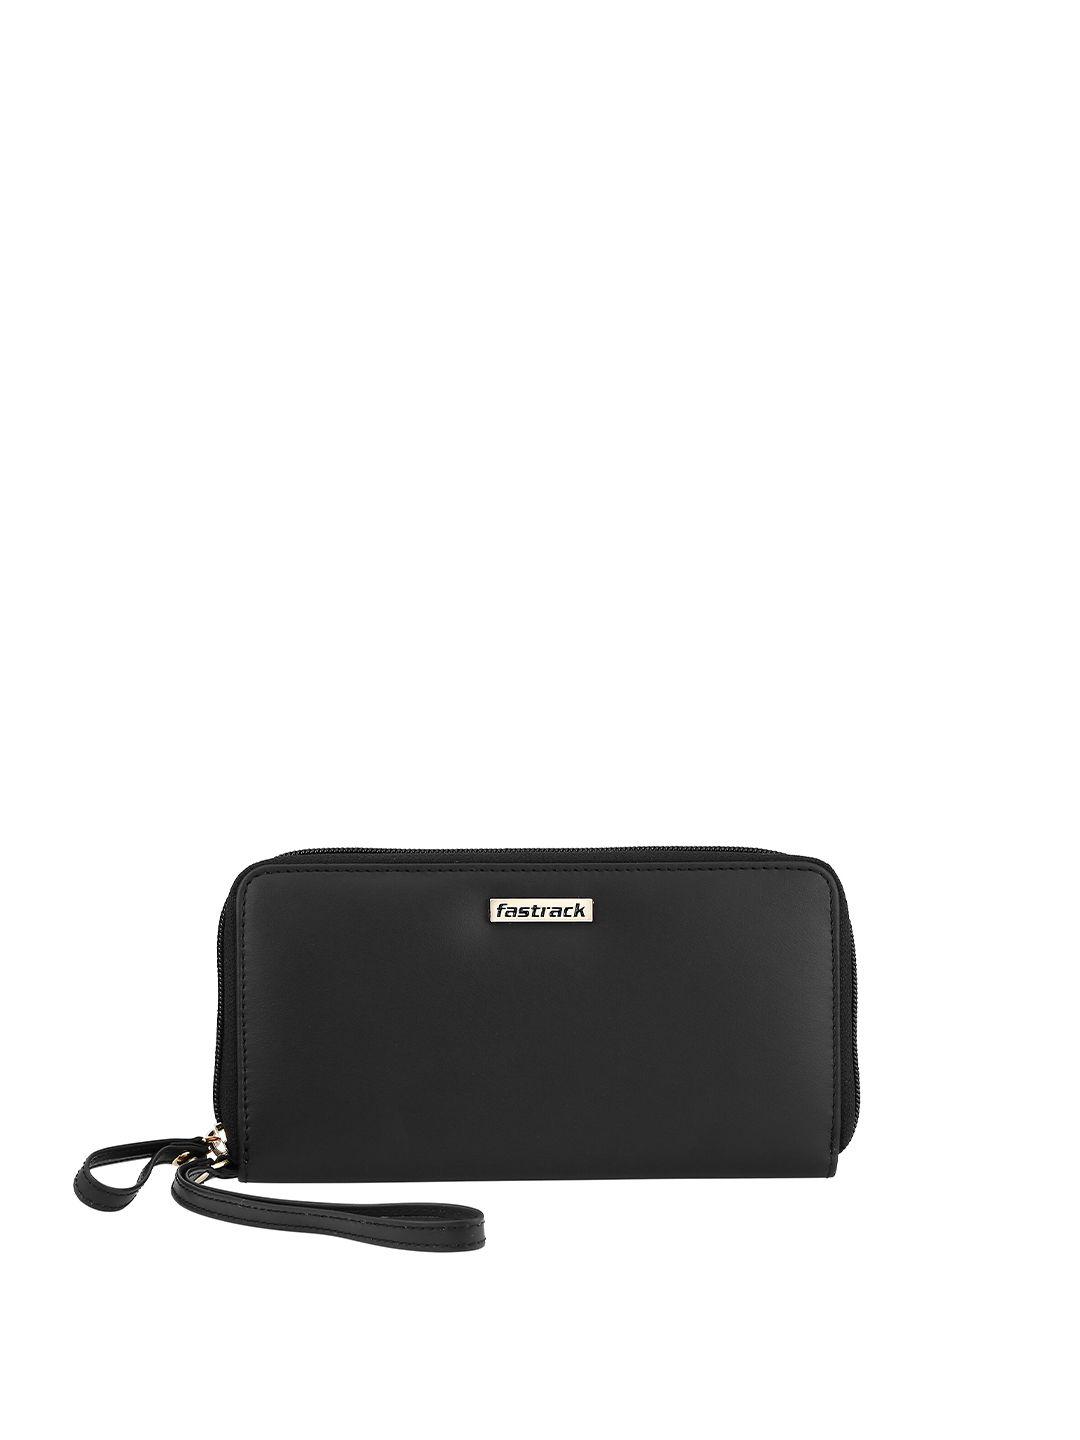 fastrack purse clutch with wrist loop